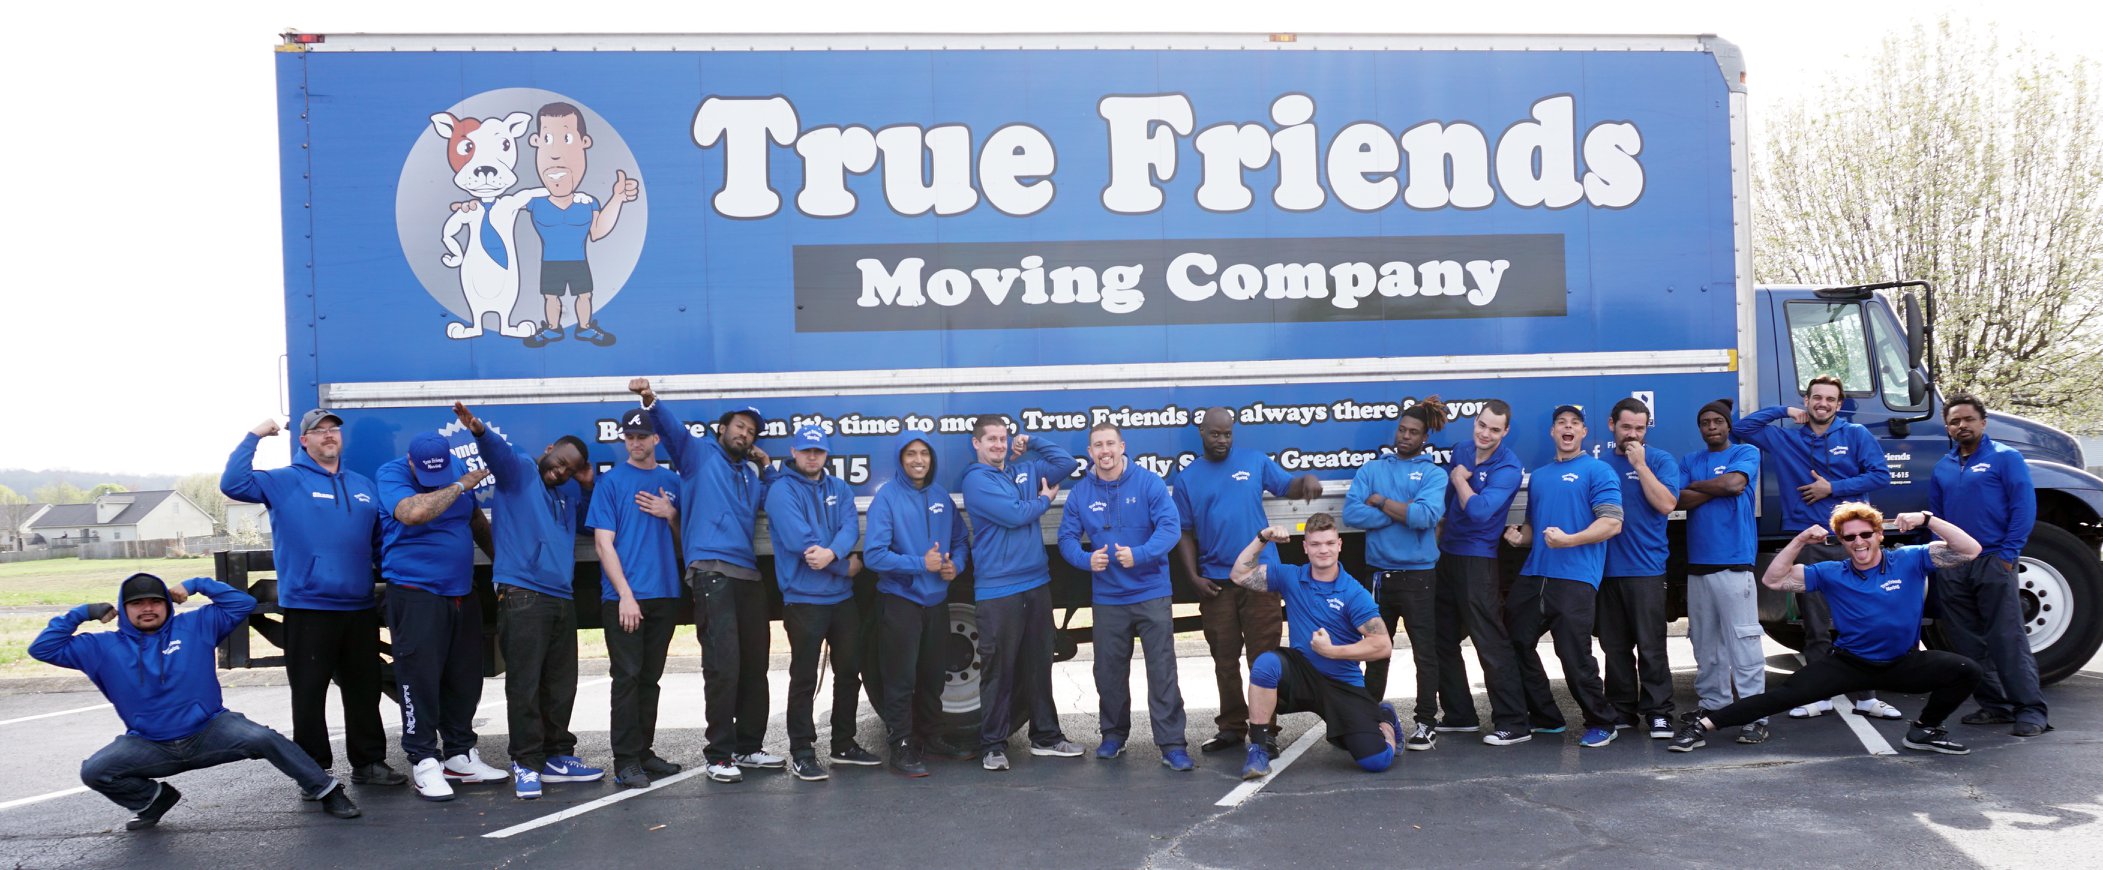 True Friends Moving Company reviews | 700 East Old Hickory Blvd - Nashville TN